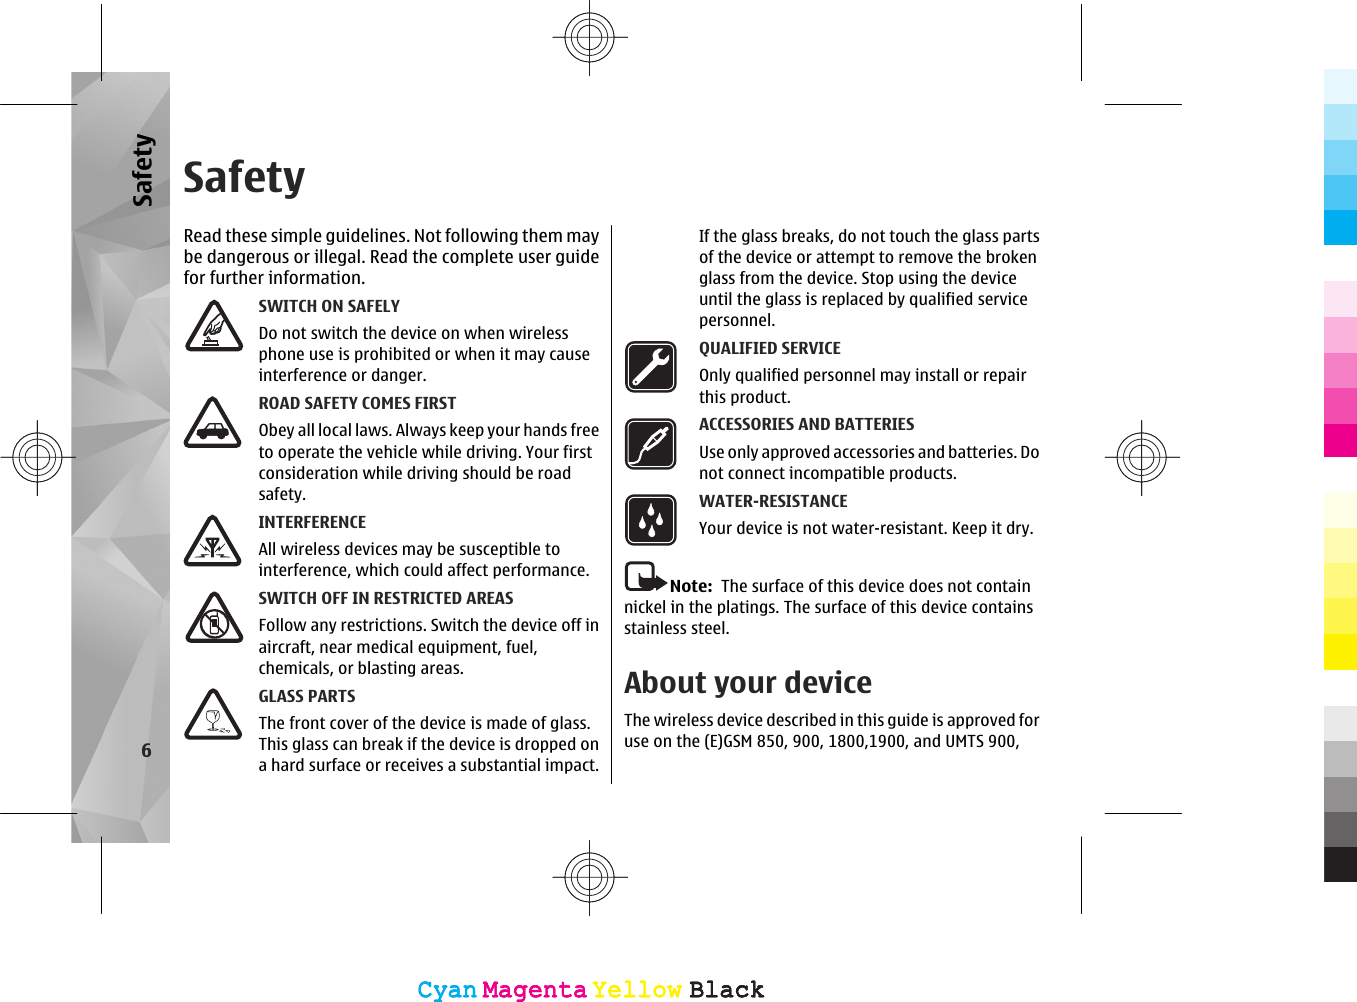 SafetyRead these simple guidelines. Not following them maybe dangerous or illegal. Read the complete user guidefor further information.SWITCH ON SAFELYDo not switch the device on when wirelessphone use is prohibited or when it may causeinterference or danger.ROAD SAFETY COMES FIRSTObey all local laws. Always keep your hands freeto operate the vehicle while driving. Your firstconsideration while driving should be roadsafety.INTERFERENCEAll wireless devices may be susceptible tointerference, which could affect performance.SWITCH OFF IN RESTRICTED AREASFollow any restrictions. Switch the device off inaircraft, near medical equipment, fuel,chemicals, or blasting areas.GLASS PARTSThe front cover of the device is made of glass.This glass can break if the device is dropped ona hard surface or receives a substantial impact.If the glass breaks, do not touch the glass partsof the device or attempt to remove the brokenglass from the device. Stop using the deviceuntil the glass is replaced by qualified servicepersonnel.QUALIFIED SERVICEOnly qualified personnel may install or repairthis product.ACCESSORIES AND BATTERIESUse only approved accessories and batteries. Donot connect incompatible products.WATER-RESISTANCEYour device is not water-resistant. Keep it dry.Note:  The surface of this device does not containnickel in the platings. The surface of this device containsstainless steel.About your deviceThe wireless device described in this guide is approved foruse on the (E)GSM 850, 900, 1800,1900, and UMTS 900,6SafetyCyanCyanMagentaMagentaYellowYellowBlackBlackCyanCyanMagentaMagentaYellowYellowBlackBlack